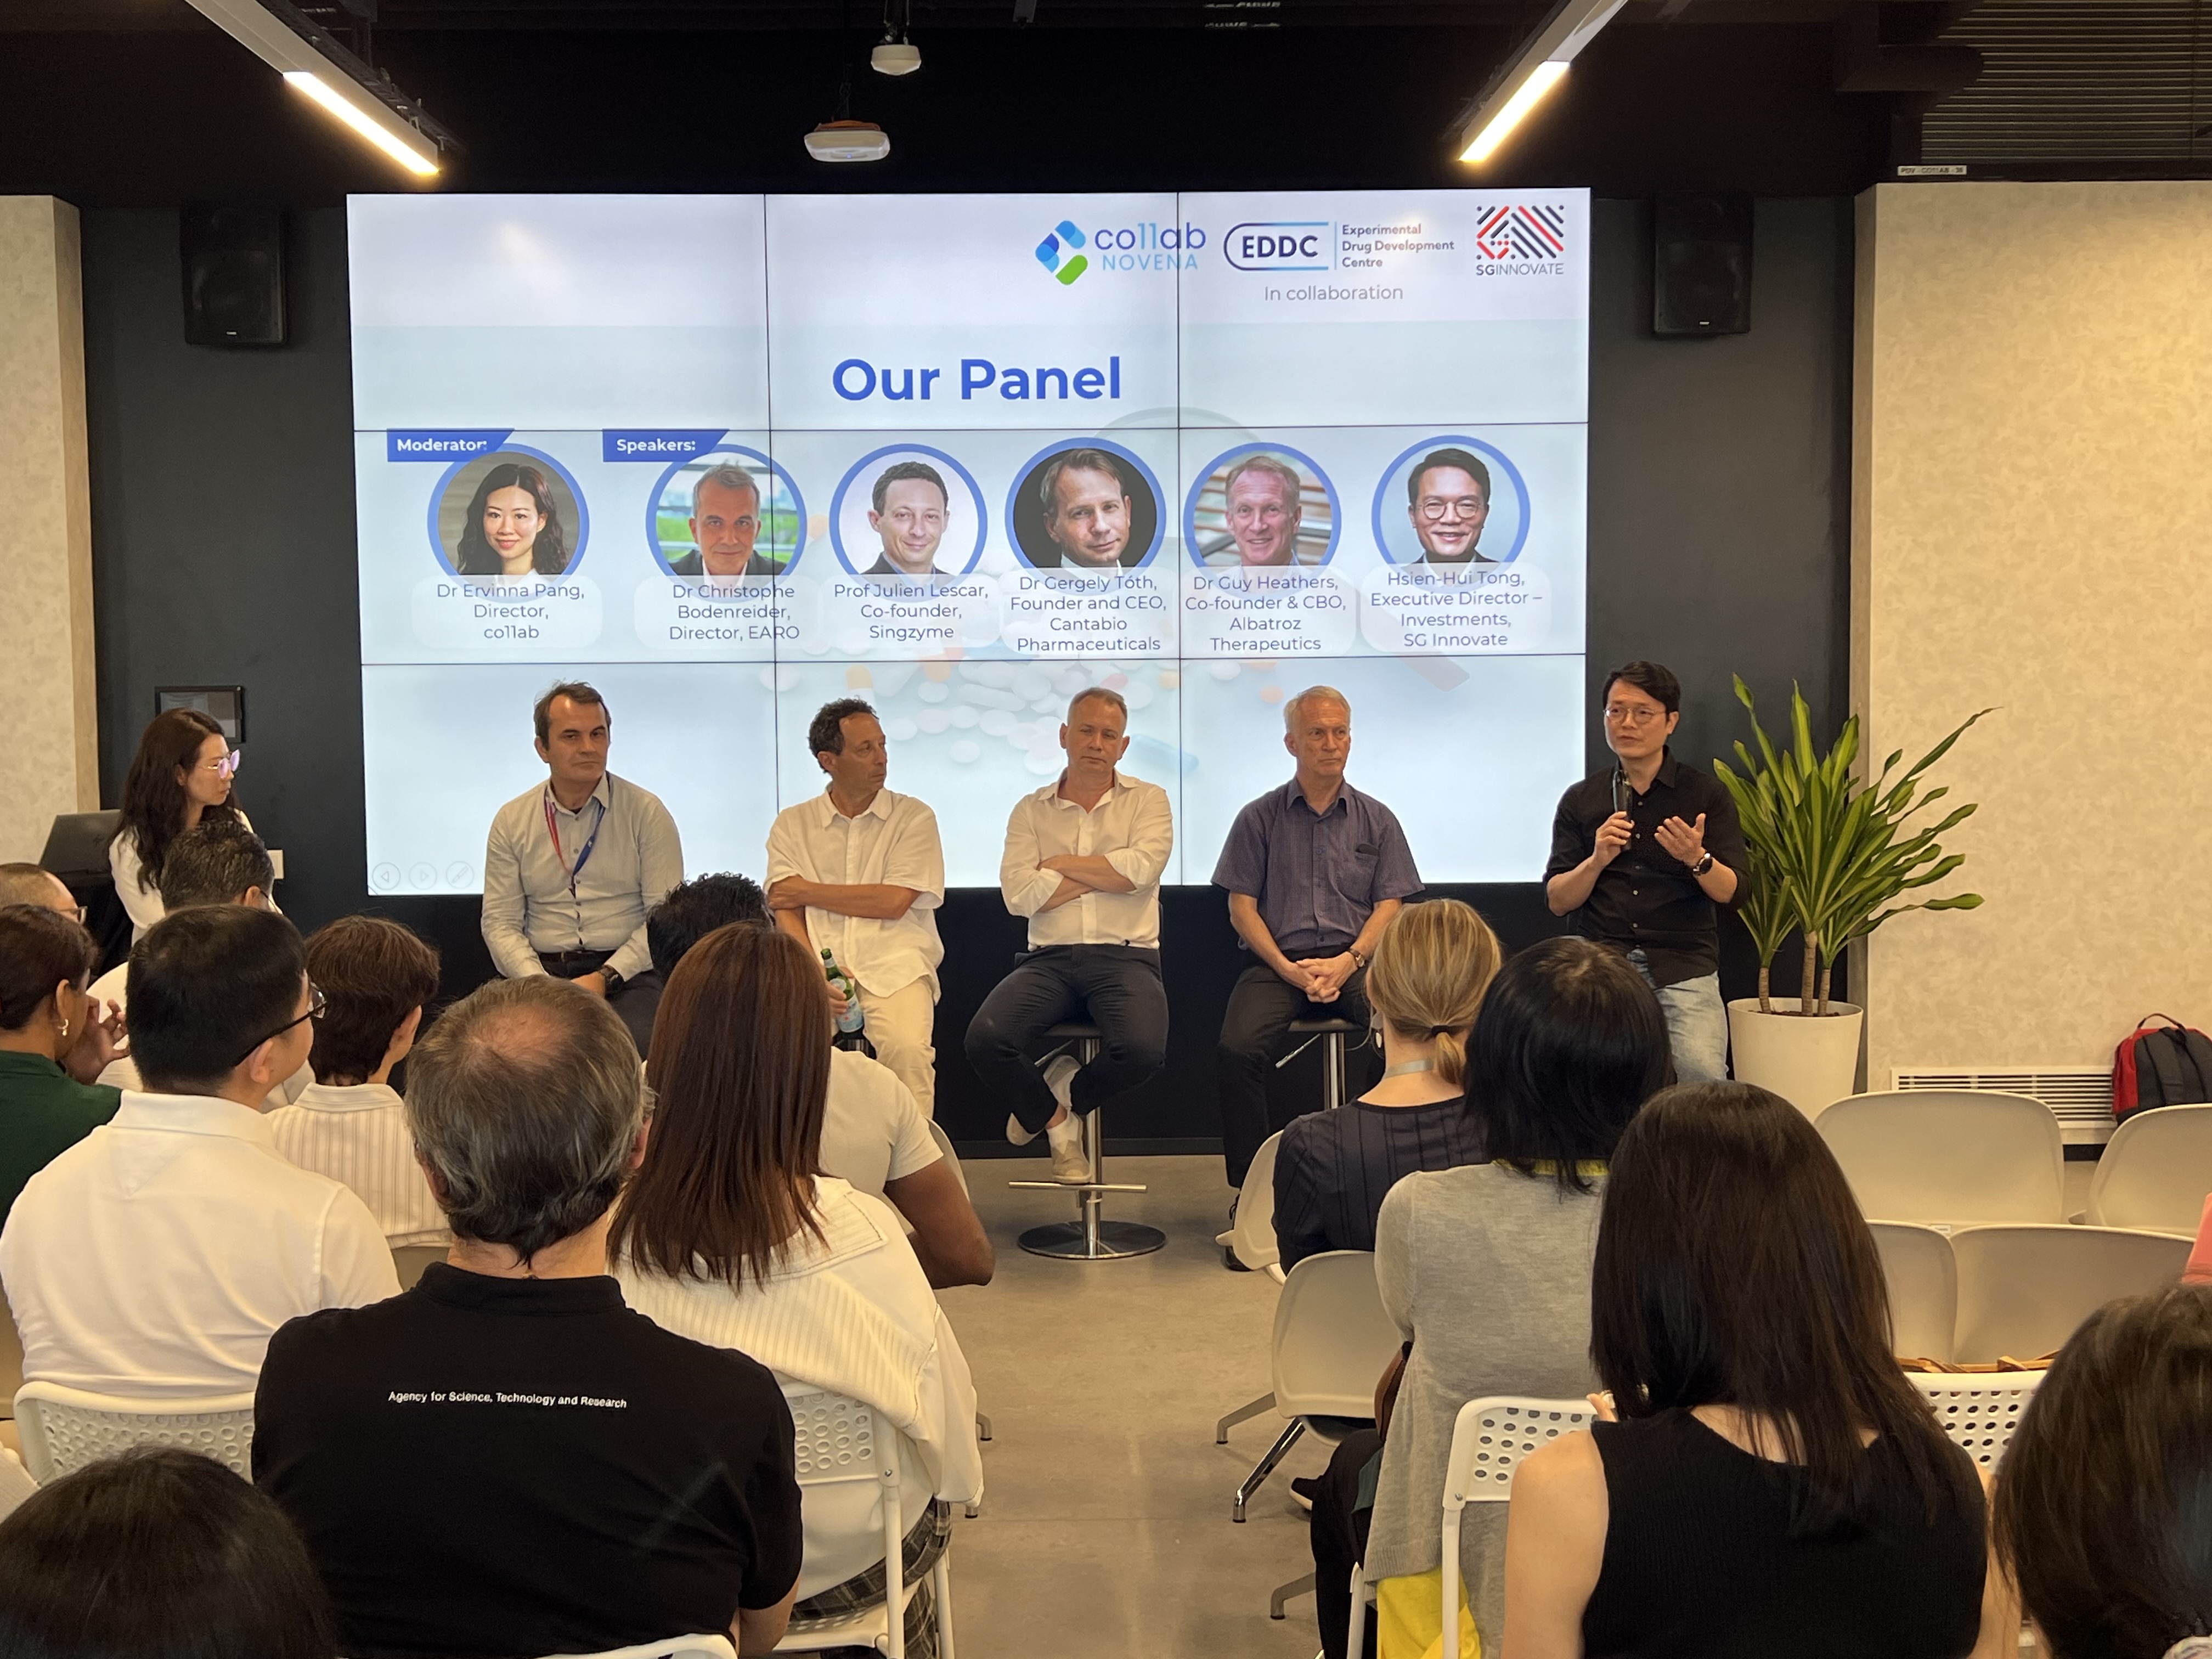 At the discussion moderated by Director of Co11ab, Dr Ervina Pang (left) with (L to R) panellists Dr Christophe Bodenreider, Professor Julian Lescar, Dr Gergely Tóth, Dr Guy Heathers and Mr Hsien-Hui Tong.